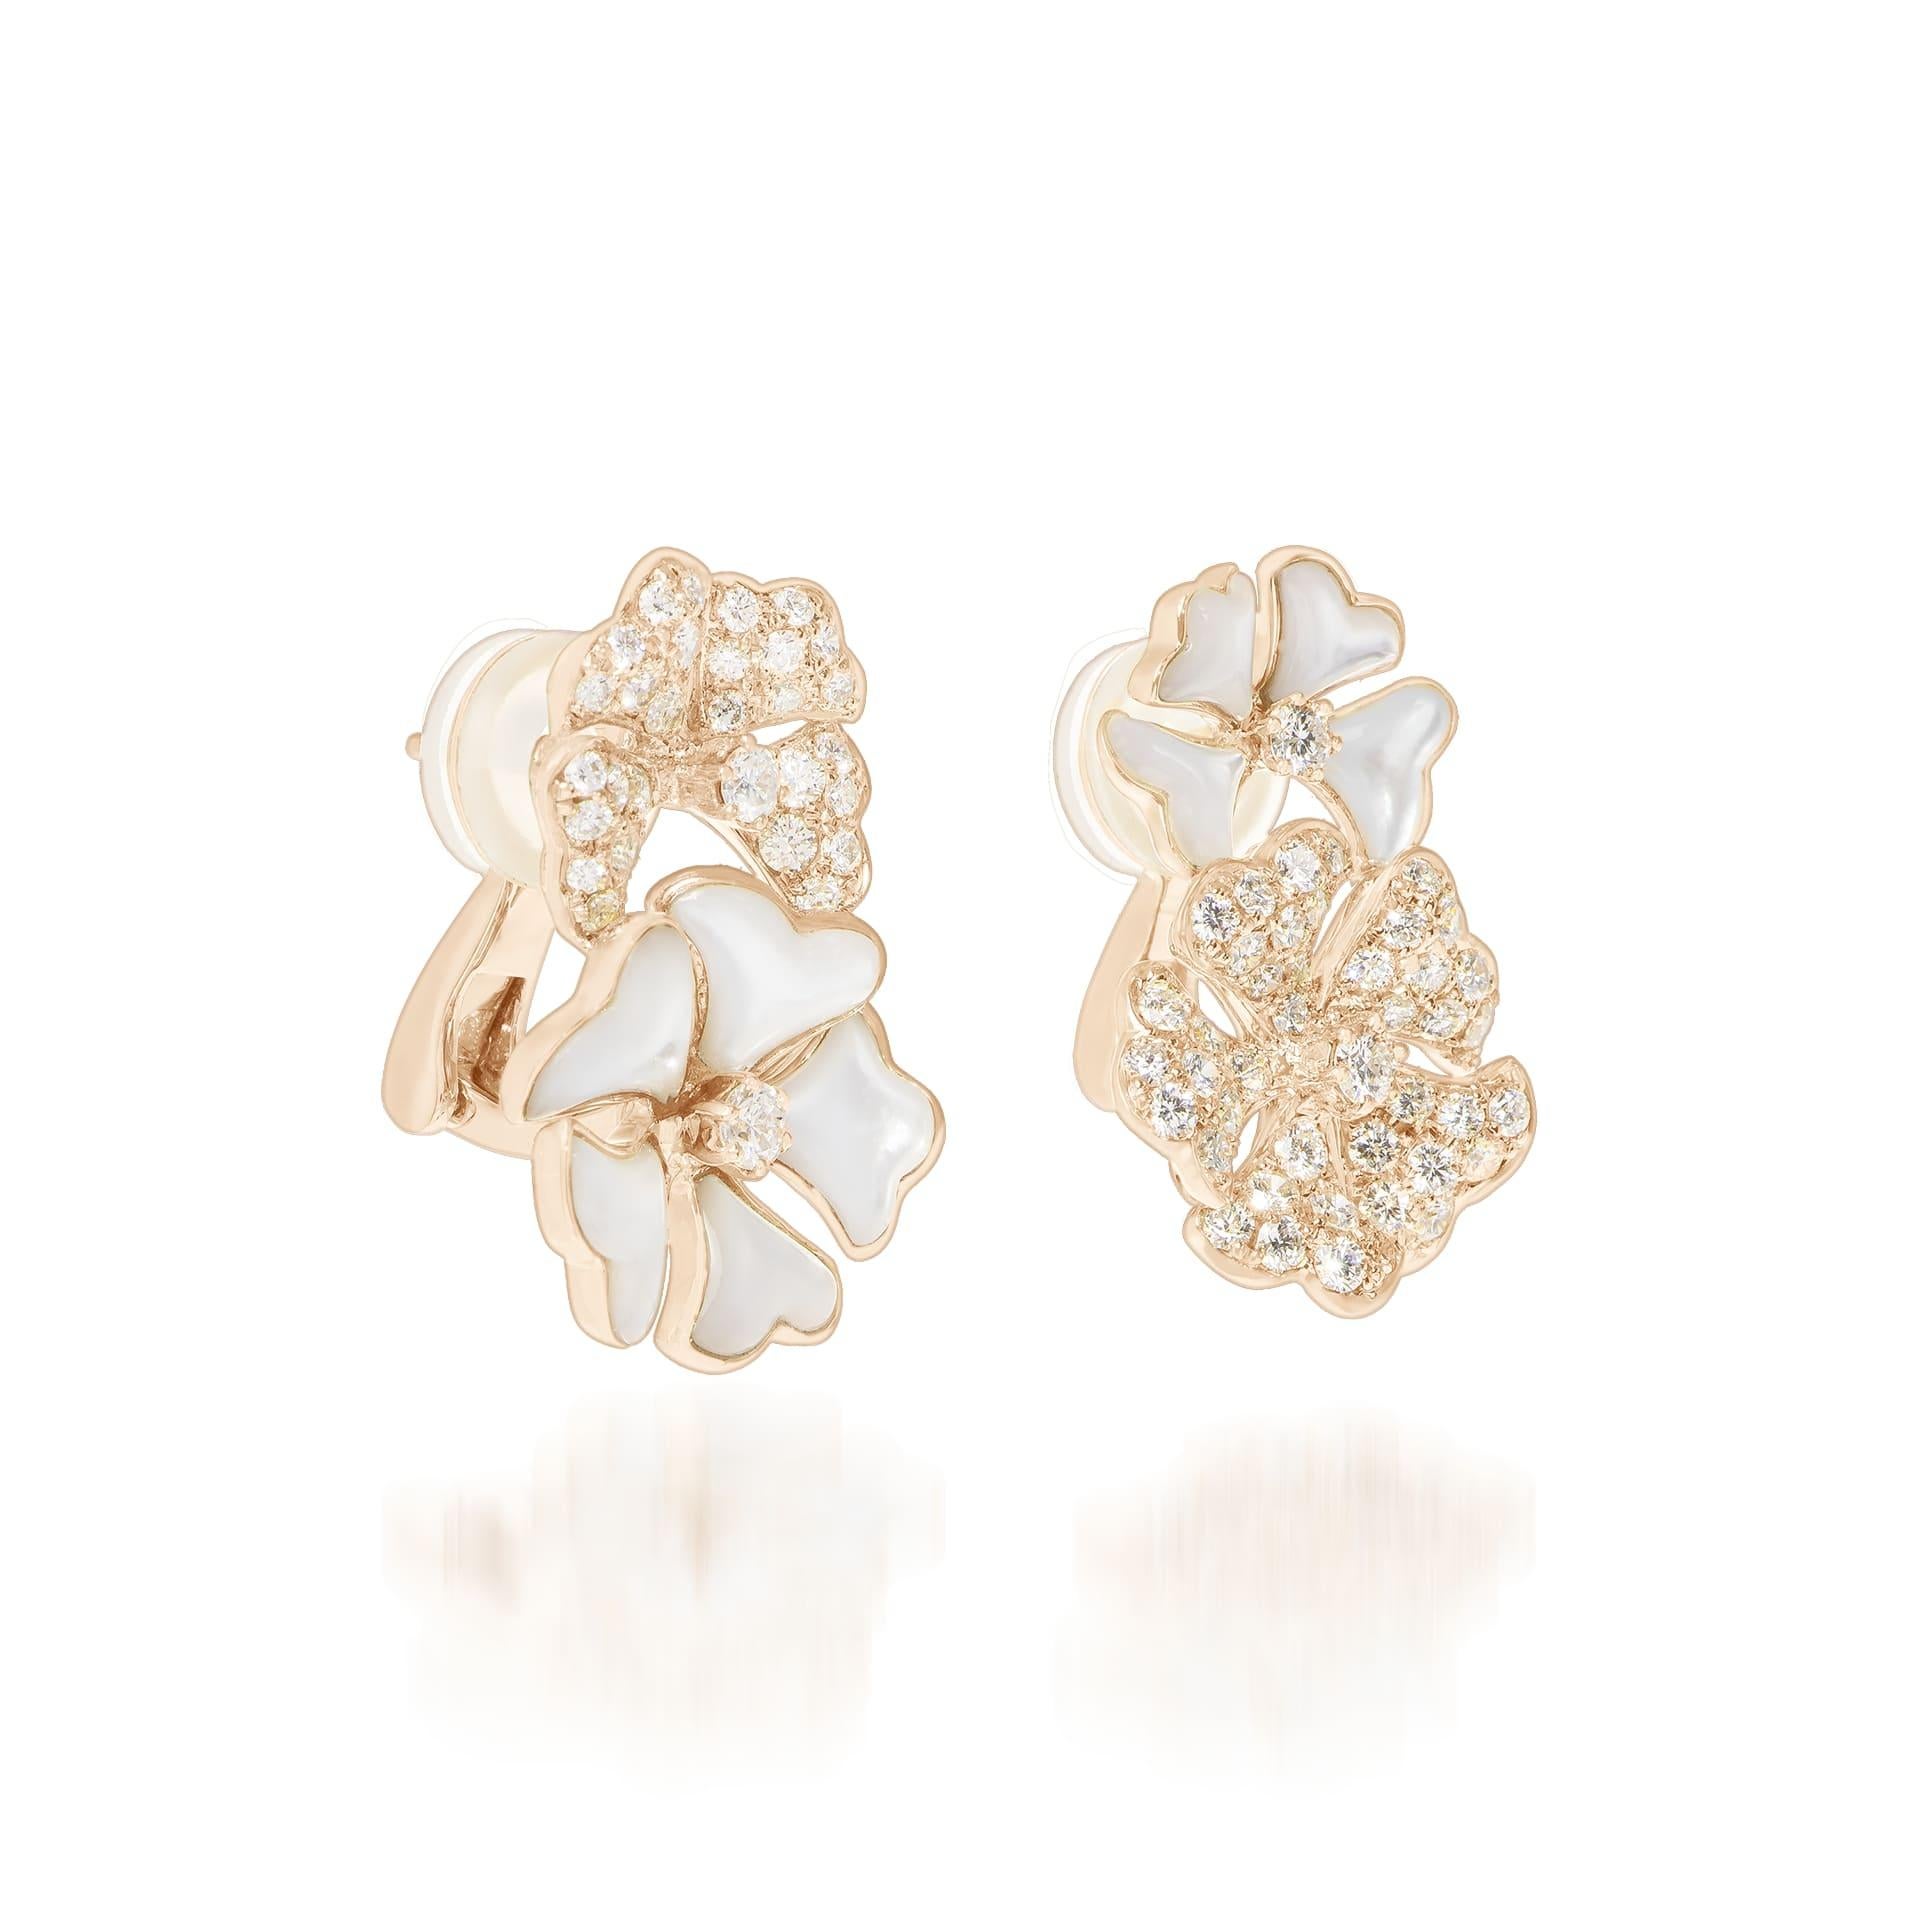 Bloom Diamond and White Mother-of-Pearl Double Bloom Earrings in 18K Rose Gold

Inspired by the exquisite petals of the alpine cinquefoil, the Bloom collection contrasts the richness of diamonds and precious metals with the light versatility of this